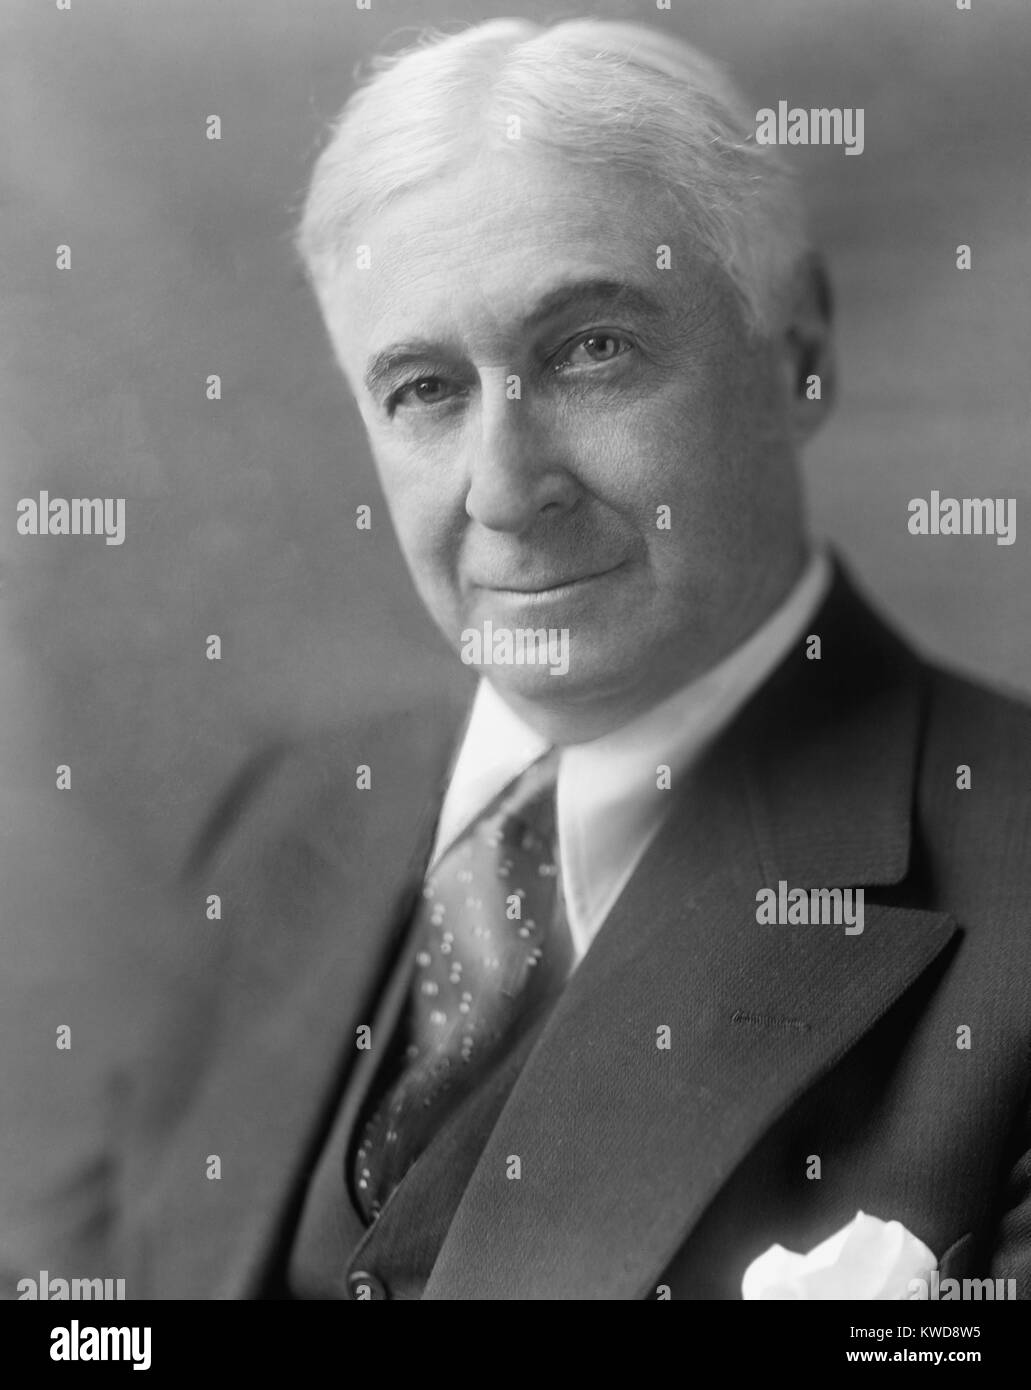 Bernard Baruch in the 1920s after he left Wall Street to become a public figure. He advised Presidents Wilson and Roosevelt during both World Wars (BSLOC 2016 8 14) Stock Photo